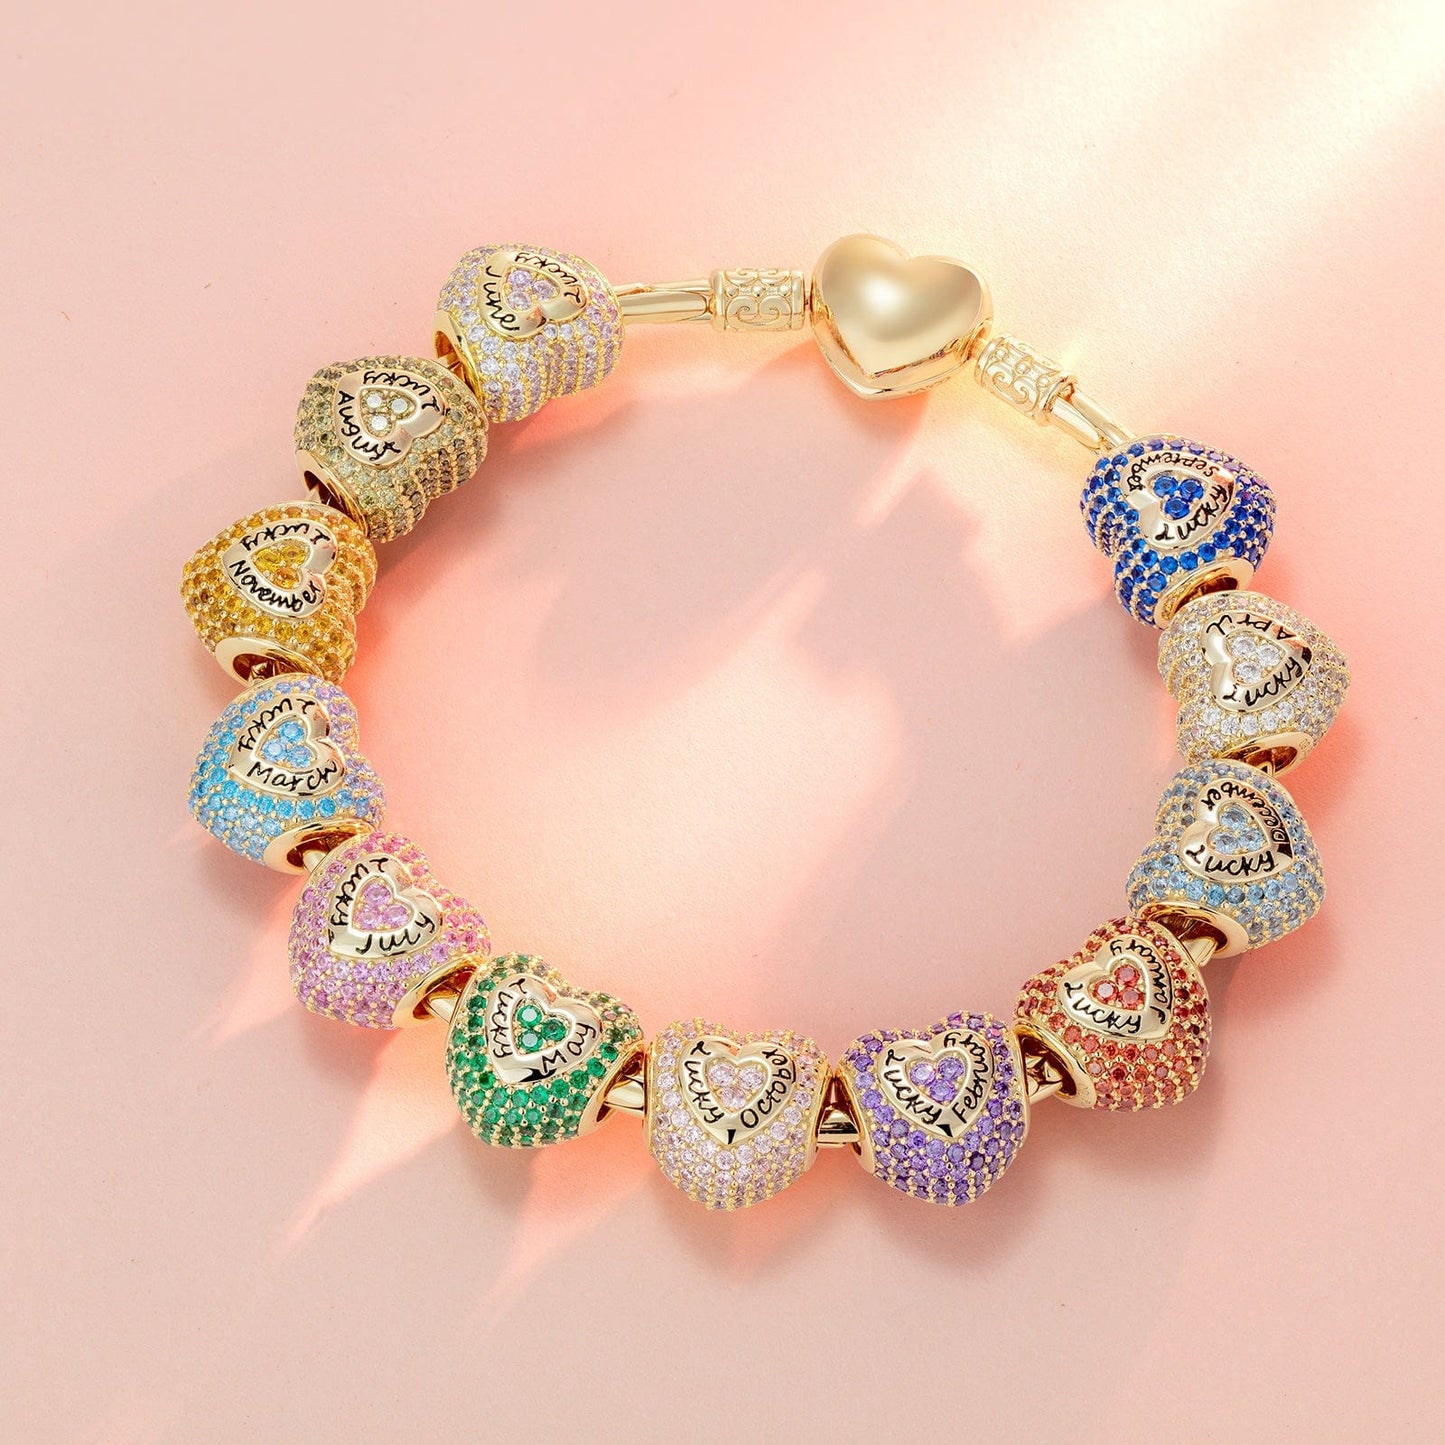 June Love Heart Birthstone Tarnish-resistant Silver Charms With Enamel In 14K Gold Plated